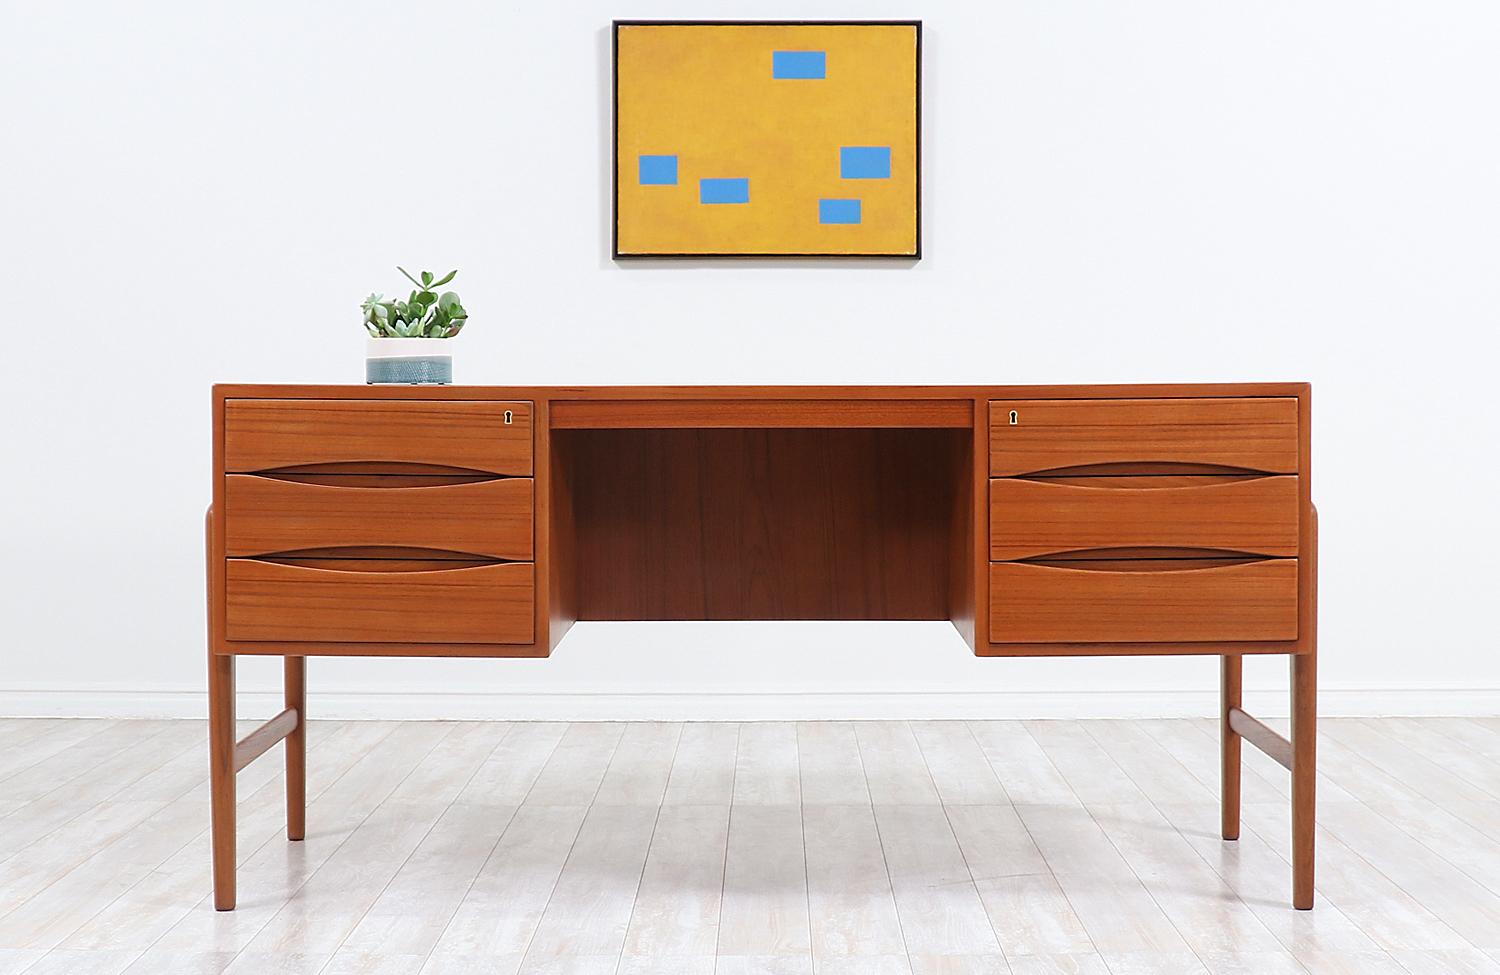 One of our most striking Danish Modern executive desks designed and made in Denmark in the 1950s. This Classic and elegant Danish desk features a solid teak frame with a stunning warm grain detail throughout and four sculpted legs that ascend from